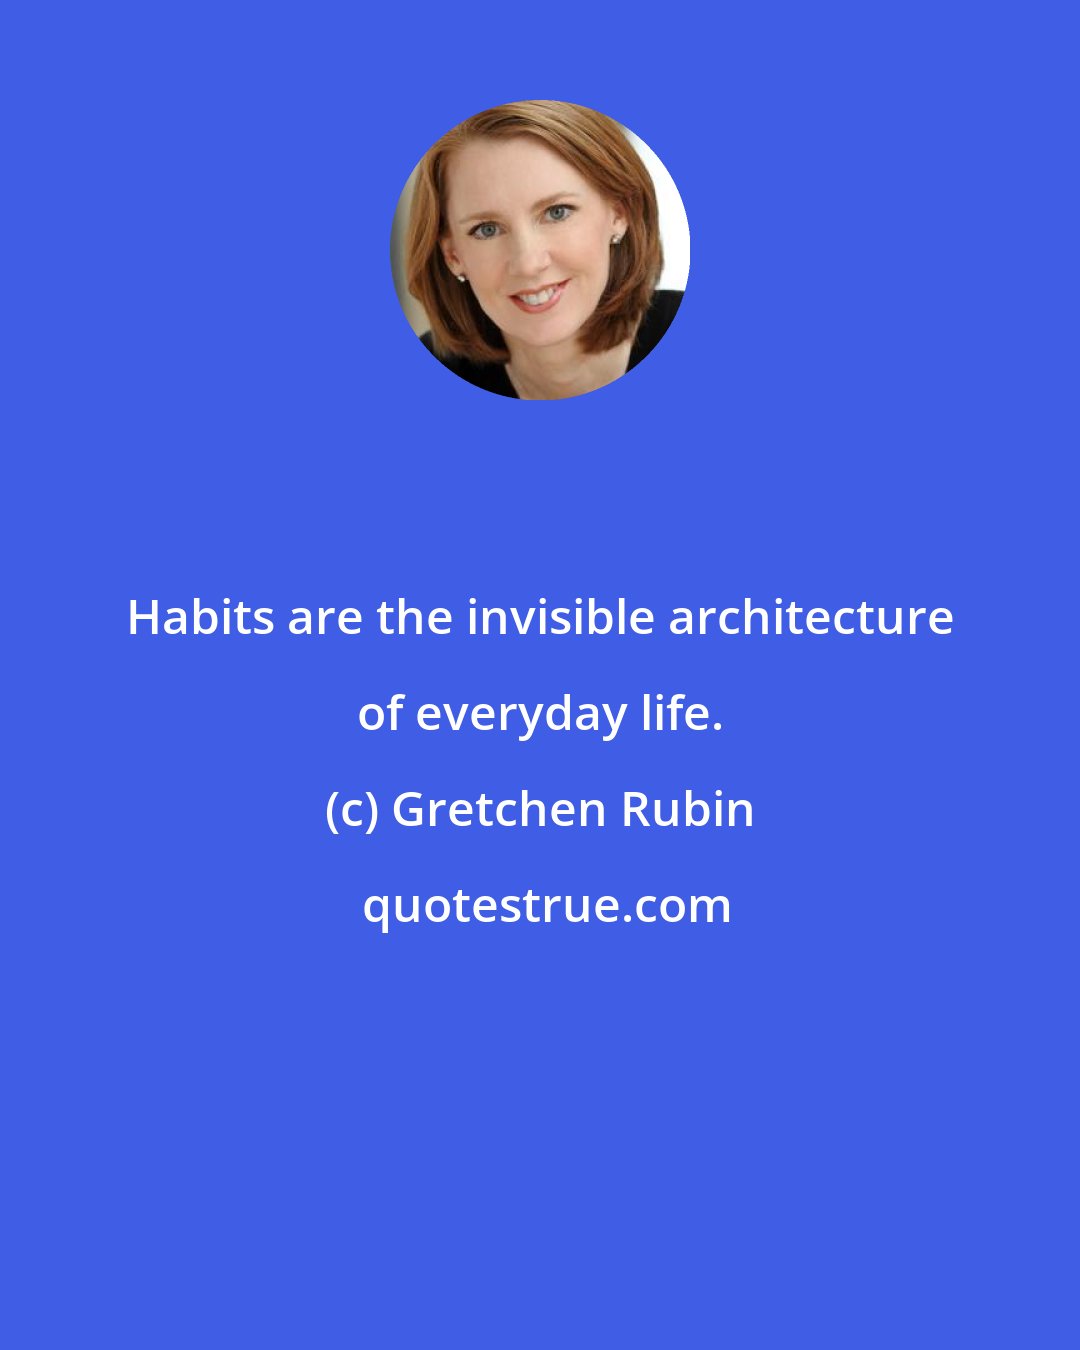 Gretchen Rubin: Habits are the invisible architecture of everyday life.